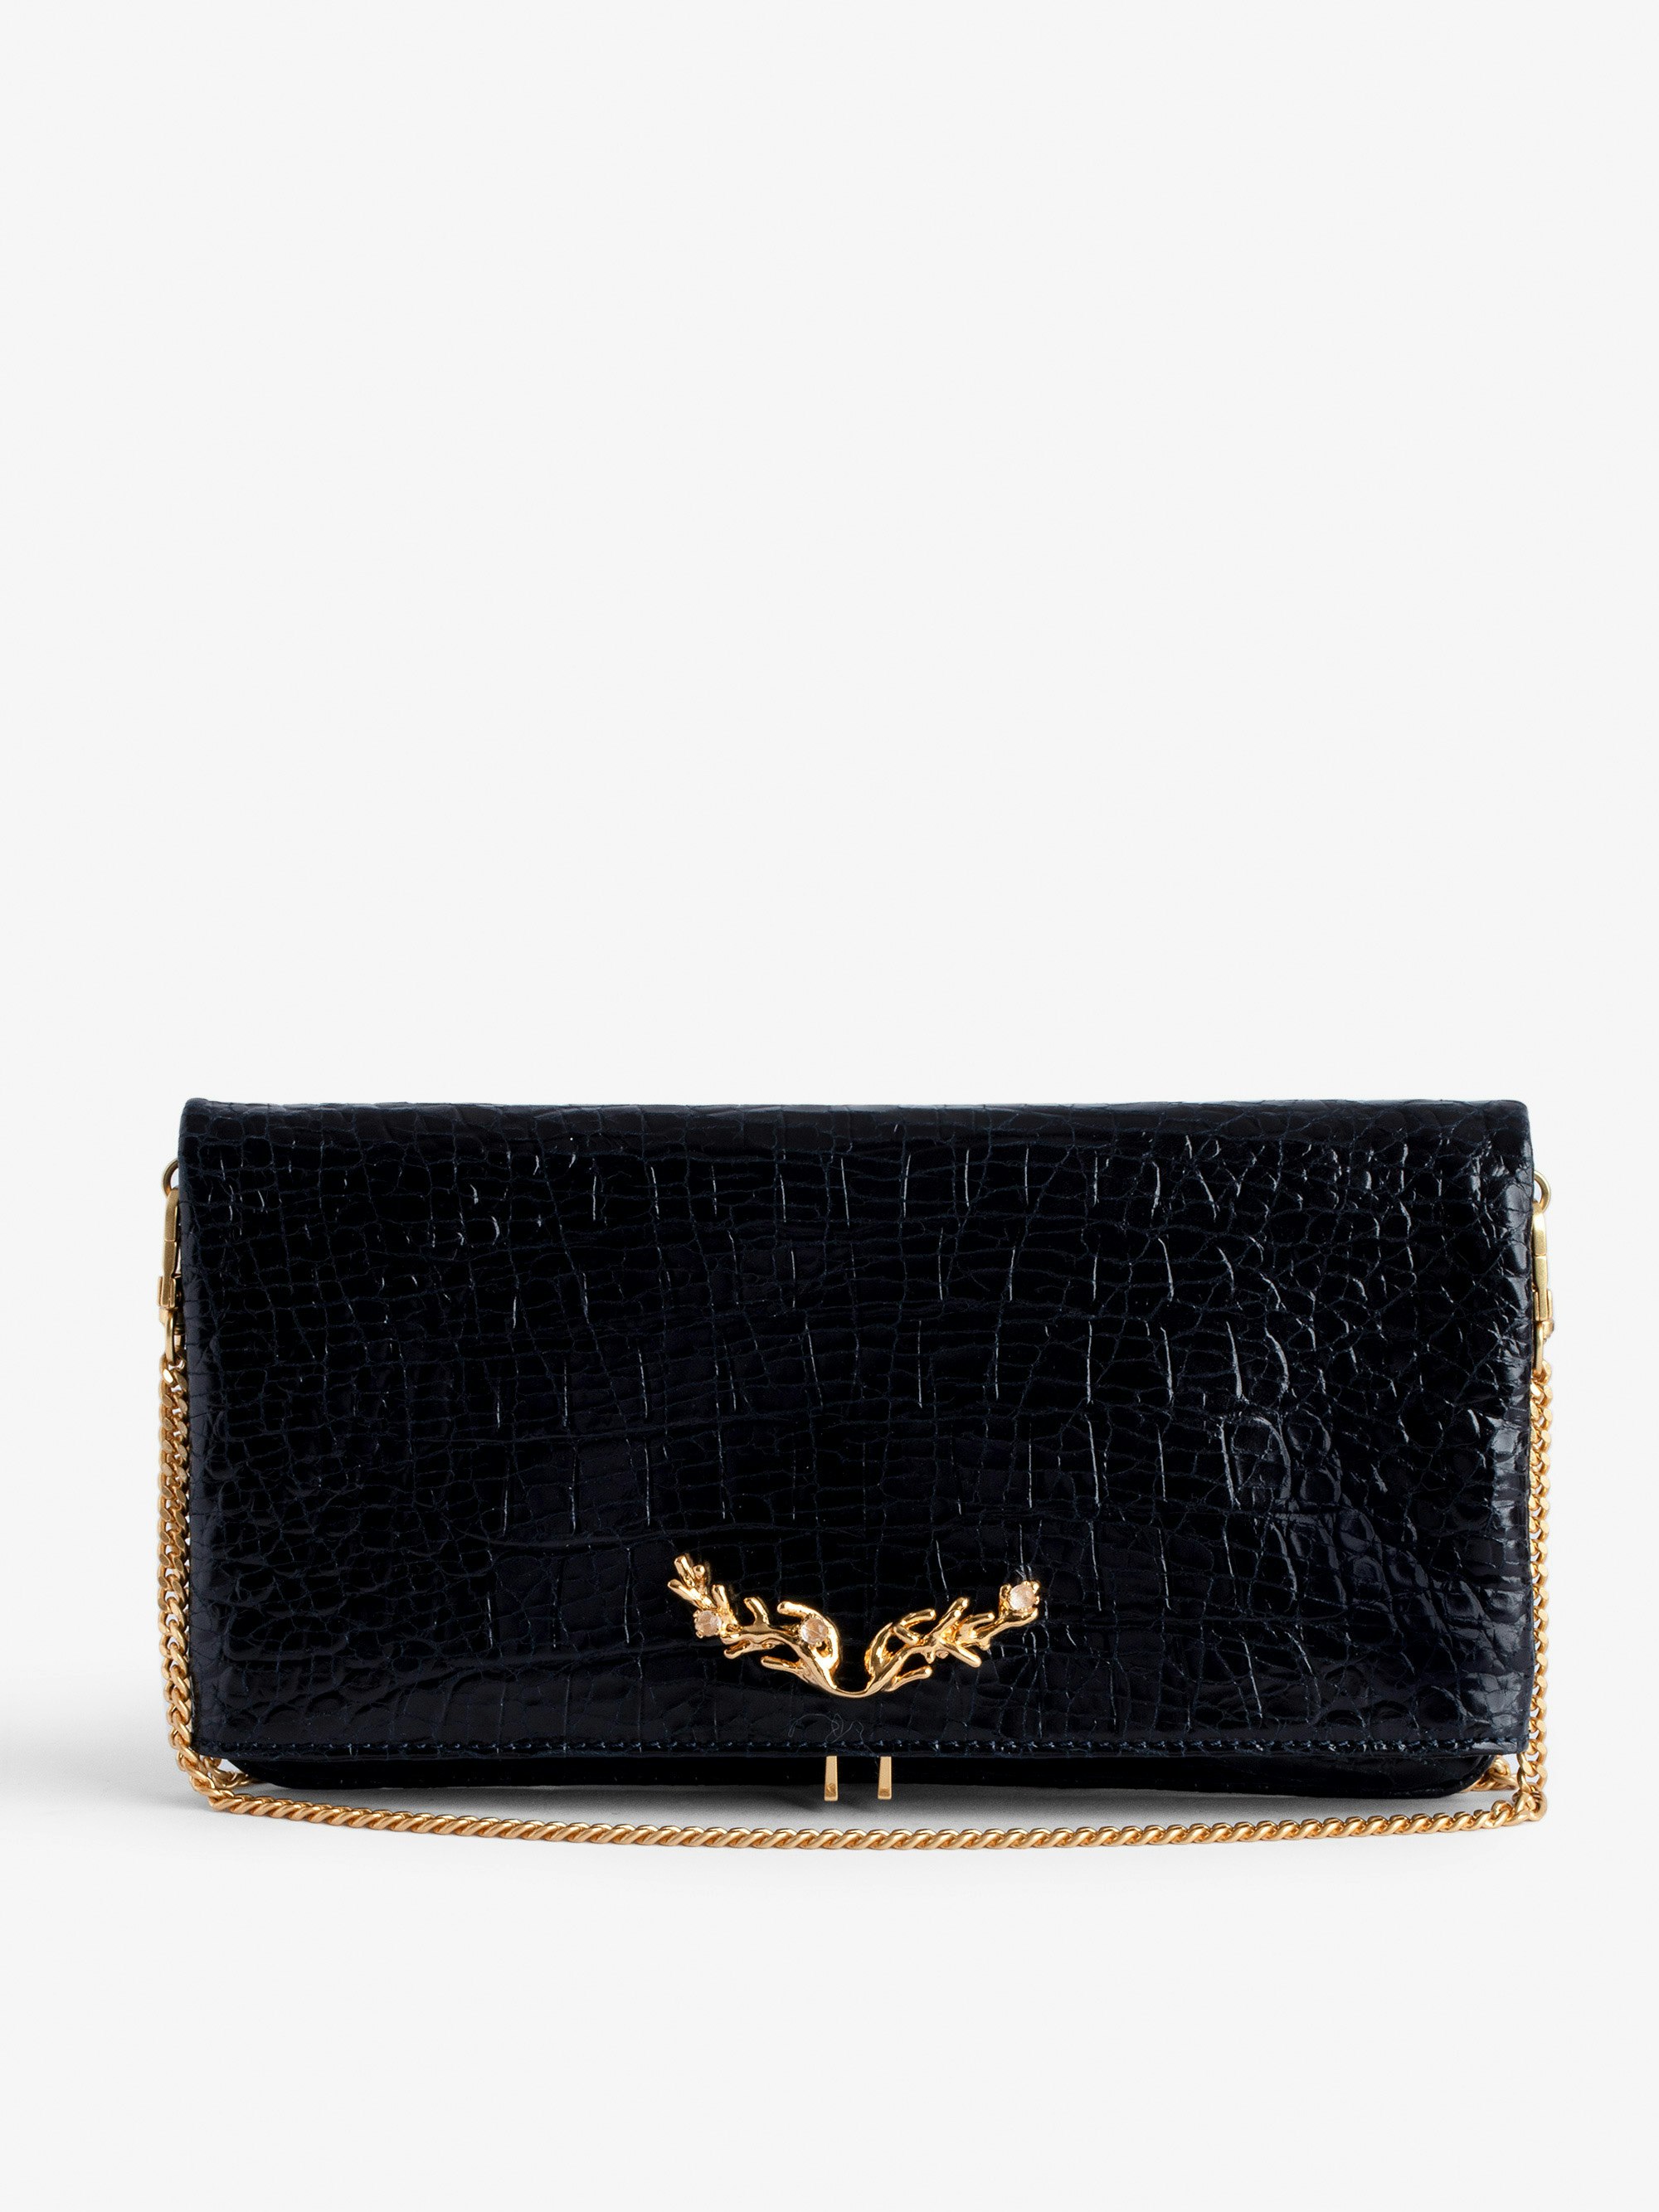 Rock Embossed Clutch - Rock navy blue croc-embossed leather clutch with Goossens gold-tone metal chain.